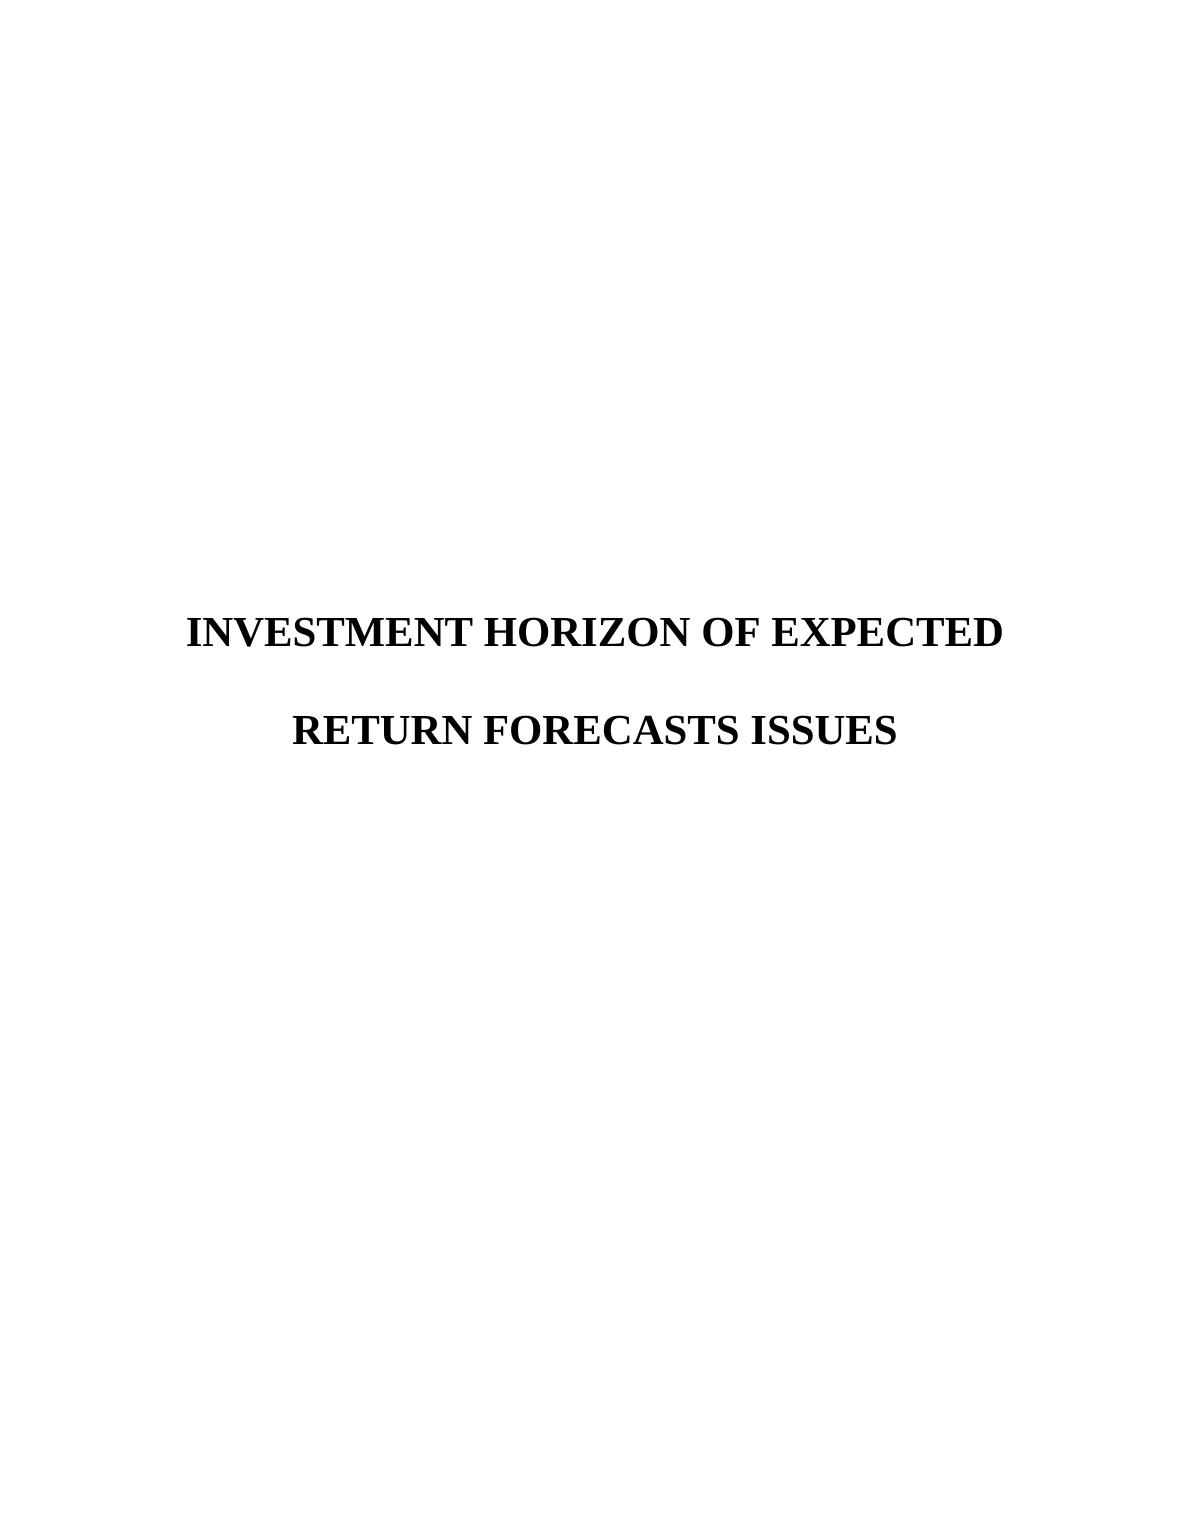 INVESTMENT HORIZON OF EXPECTED RETURN FORECASTS ISSUES ACKNOWLEDGEMENT_1